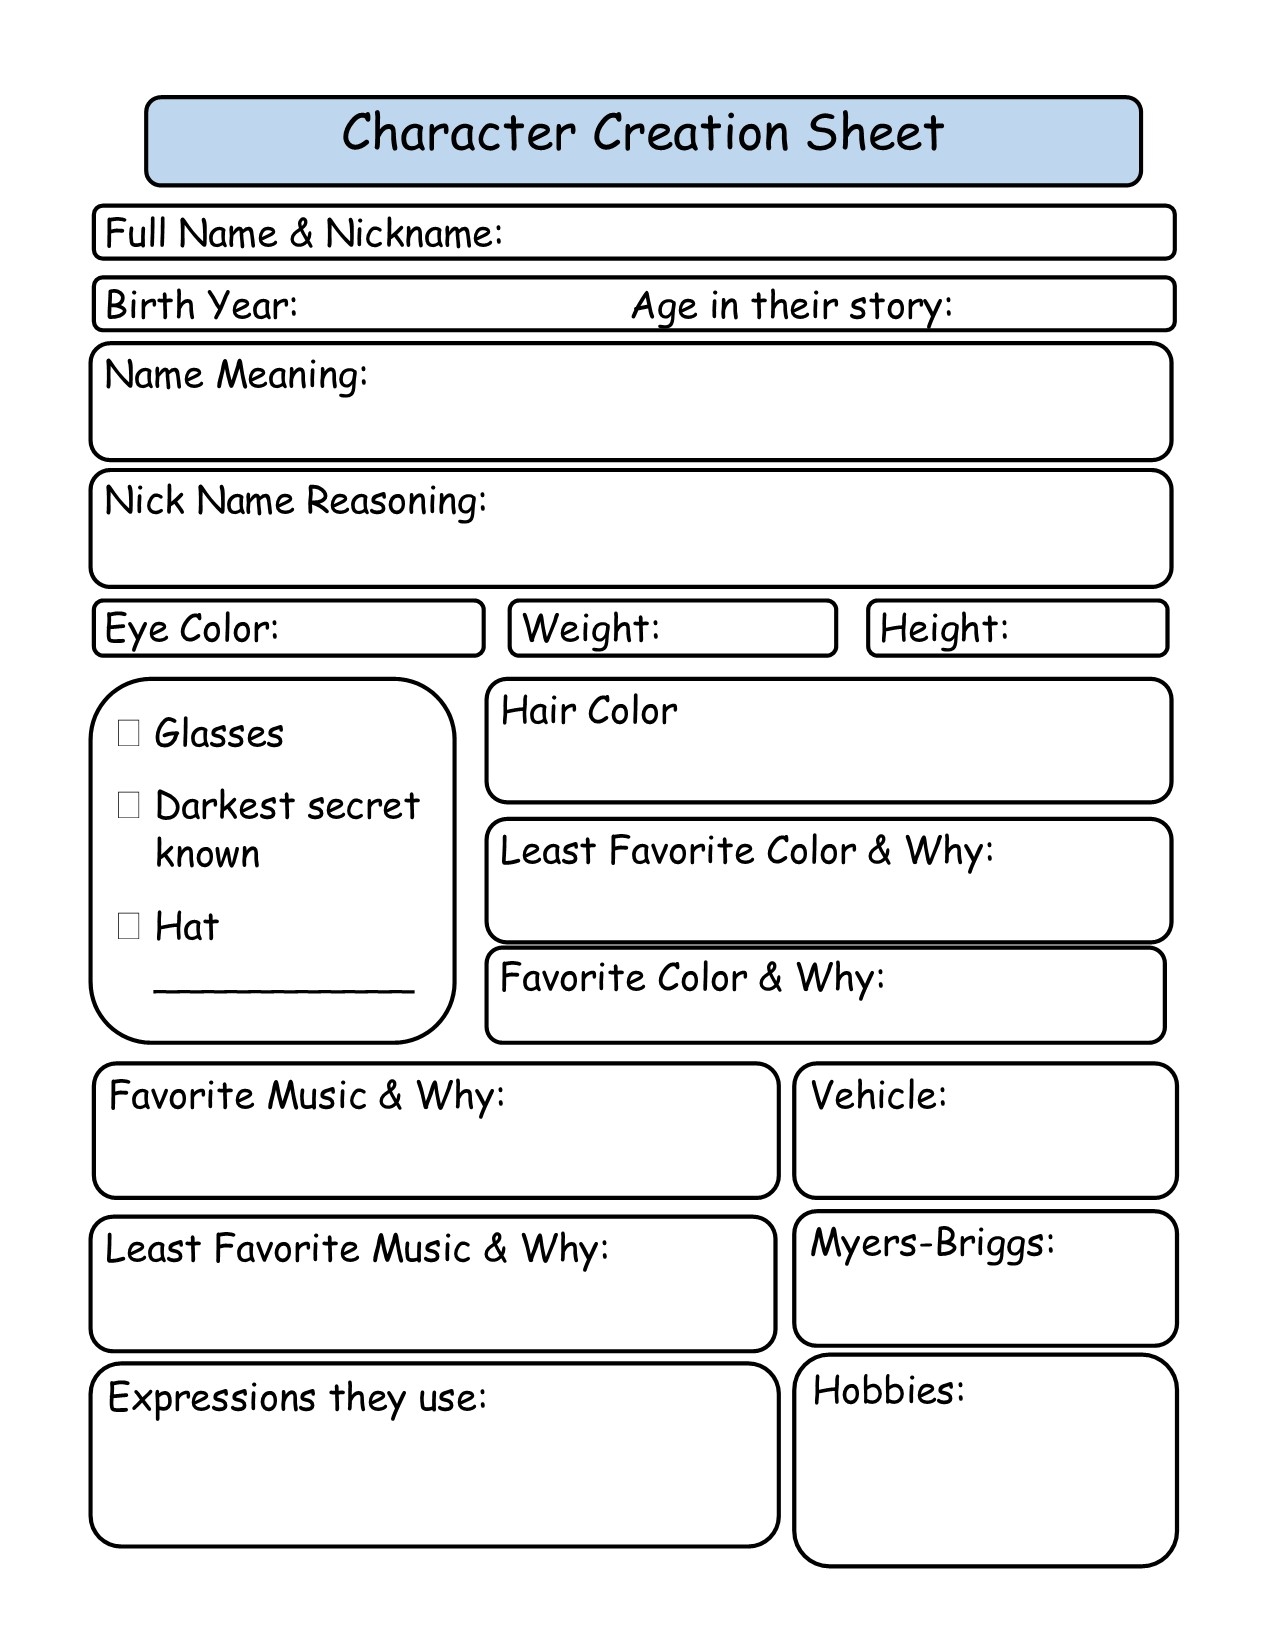 Character Sheet My A muse ing Life